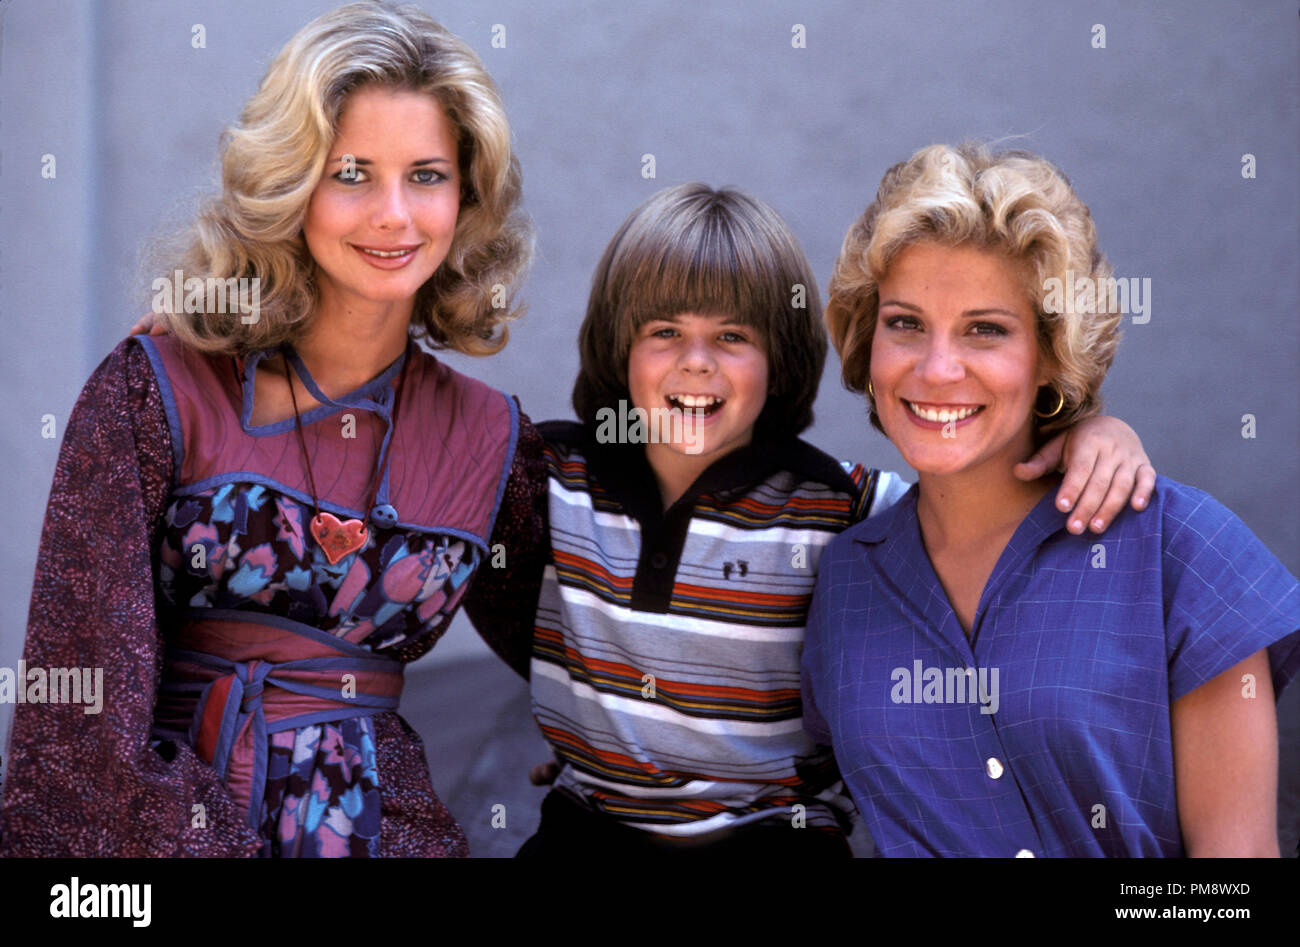 Studio Publicity Still from "Eight Is Enough" Dianne Kay, Adam Rich, Lani O'Grady 1979 All Rights Reserved    File Reference # 31718128THA  For Editorial Use Only Stock Photo